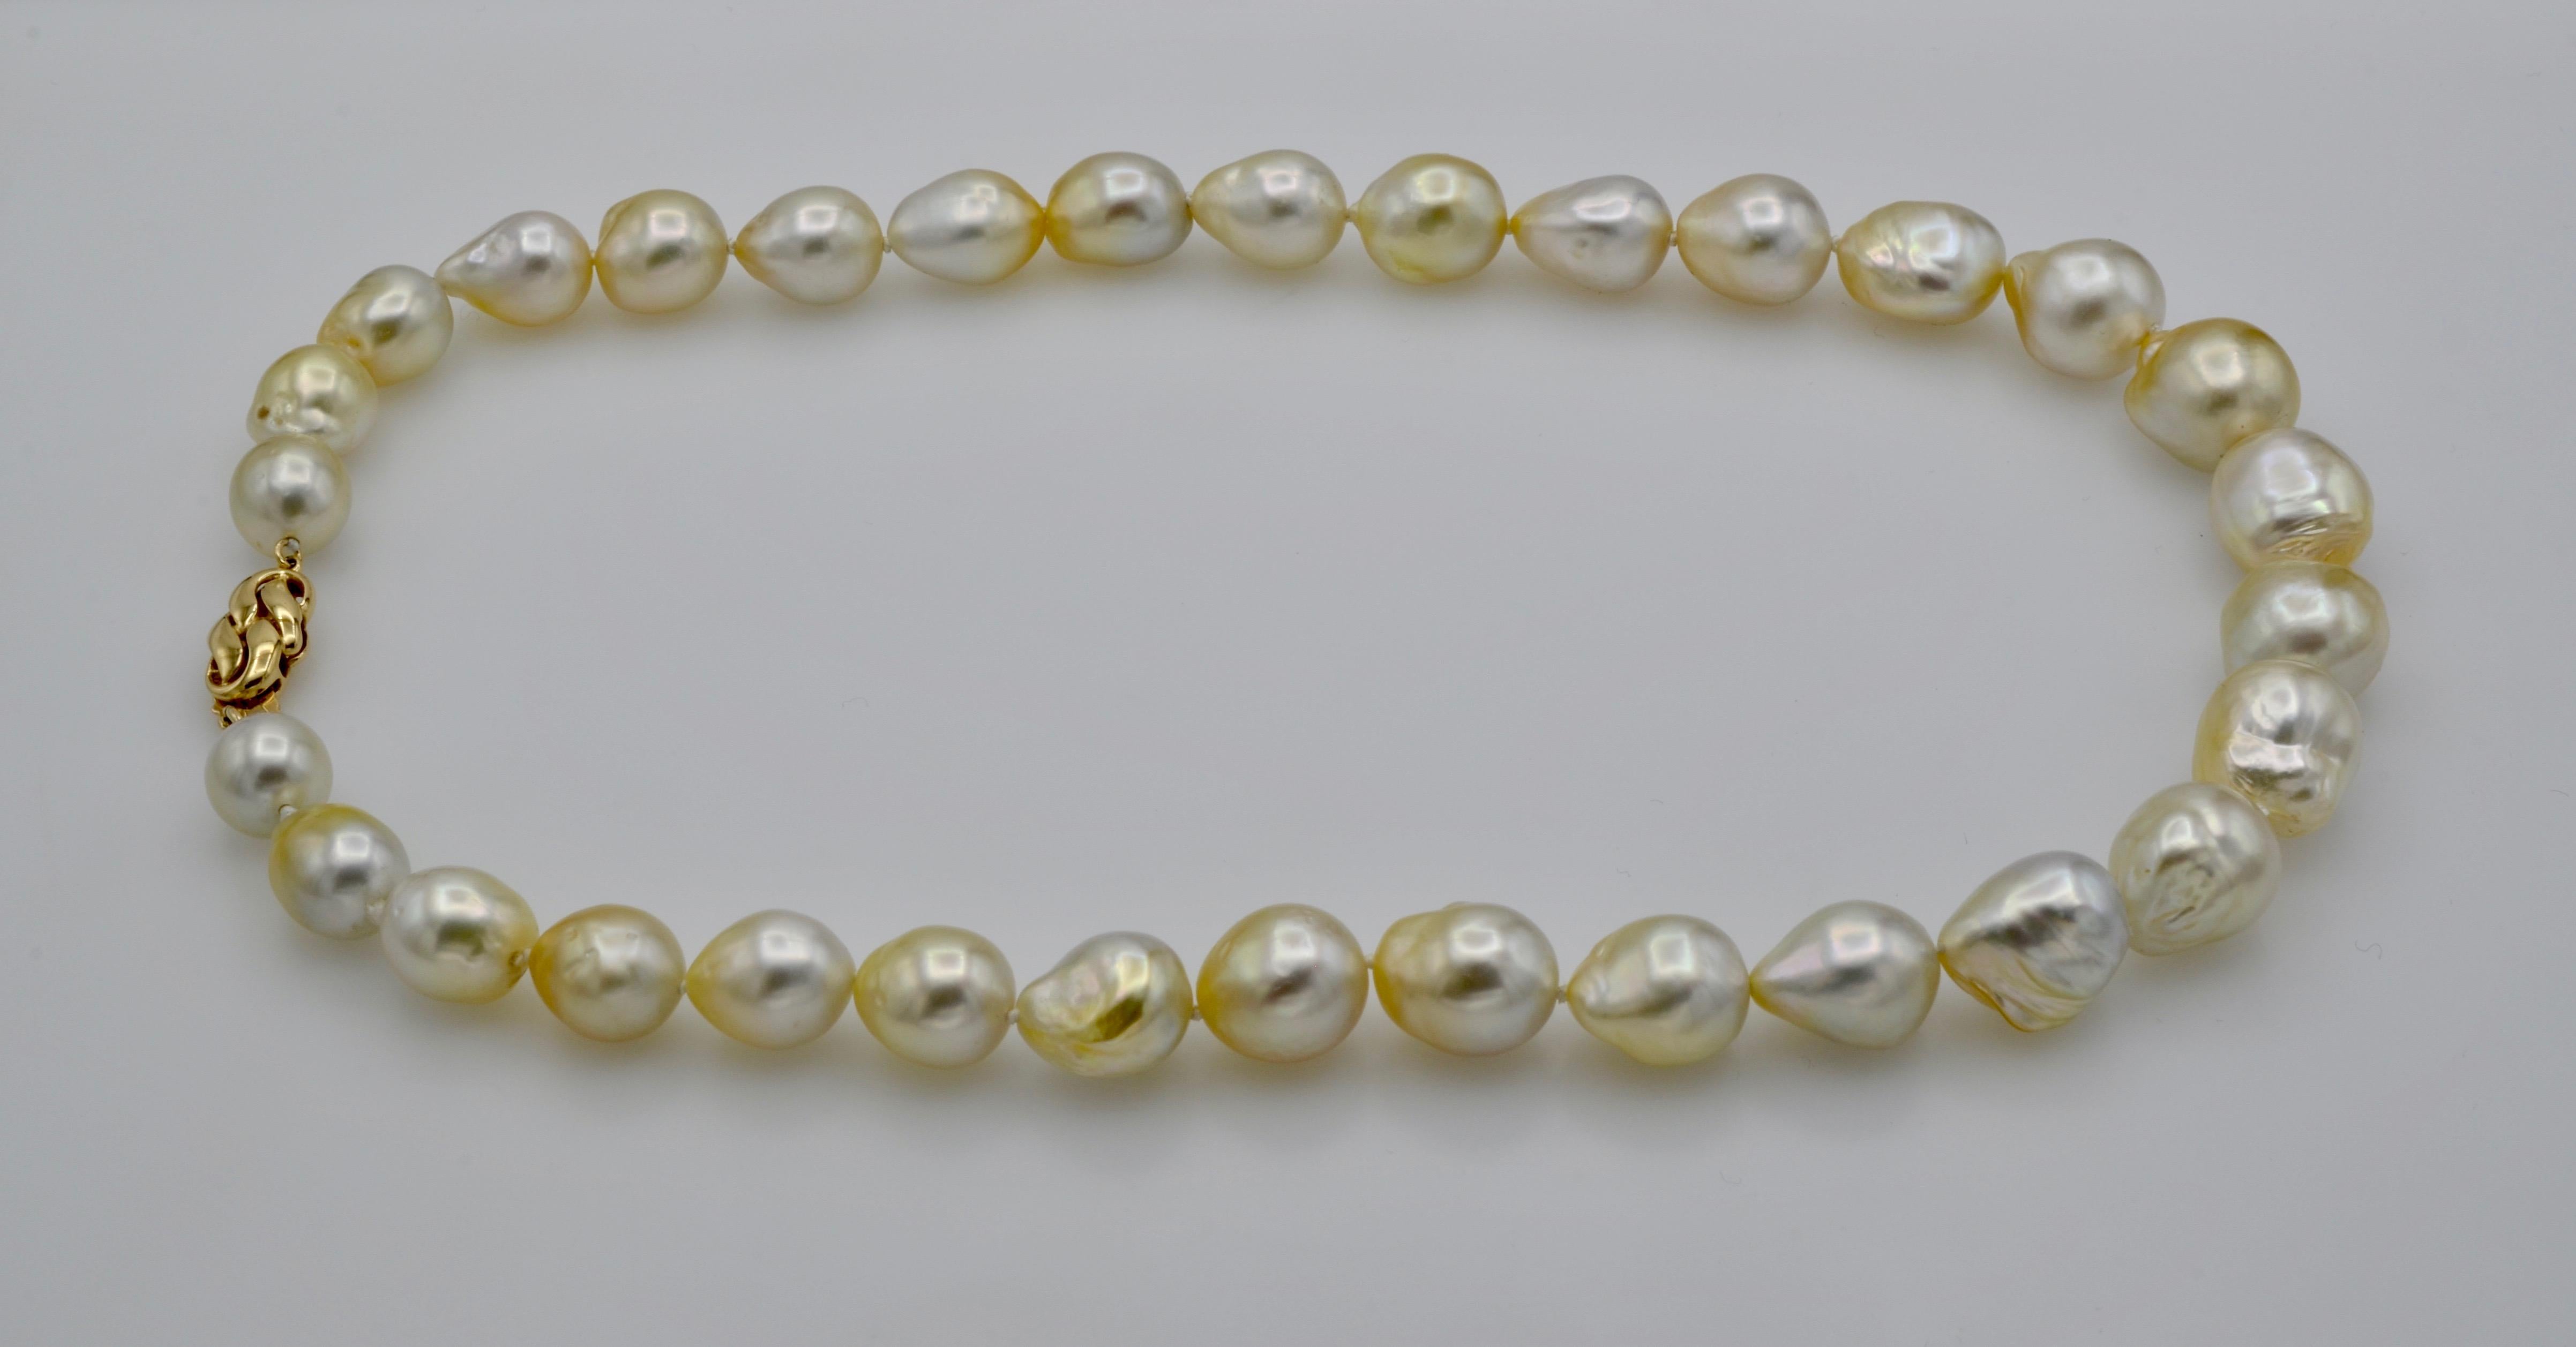 South Sea Pearl White Baroque Necklace 14 Karat Gold 3